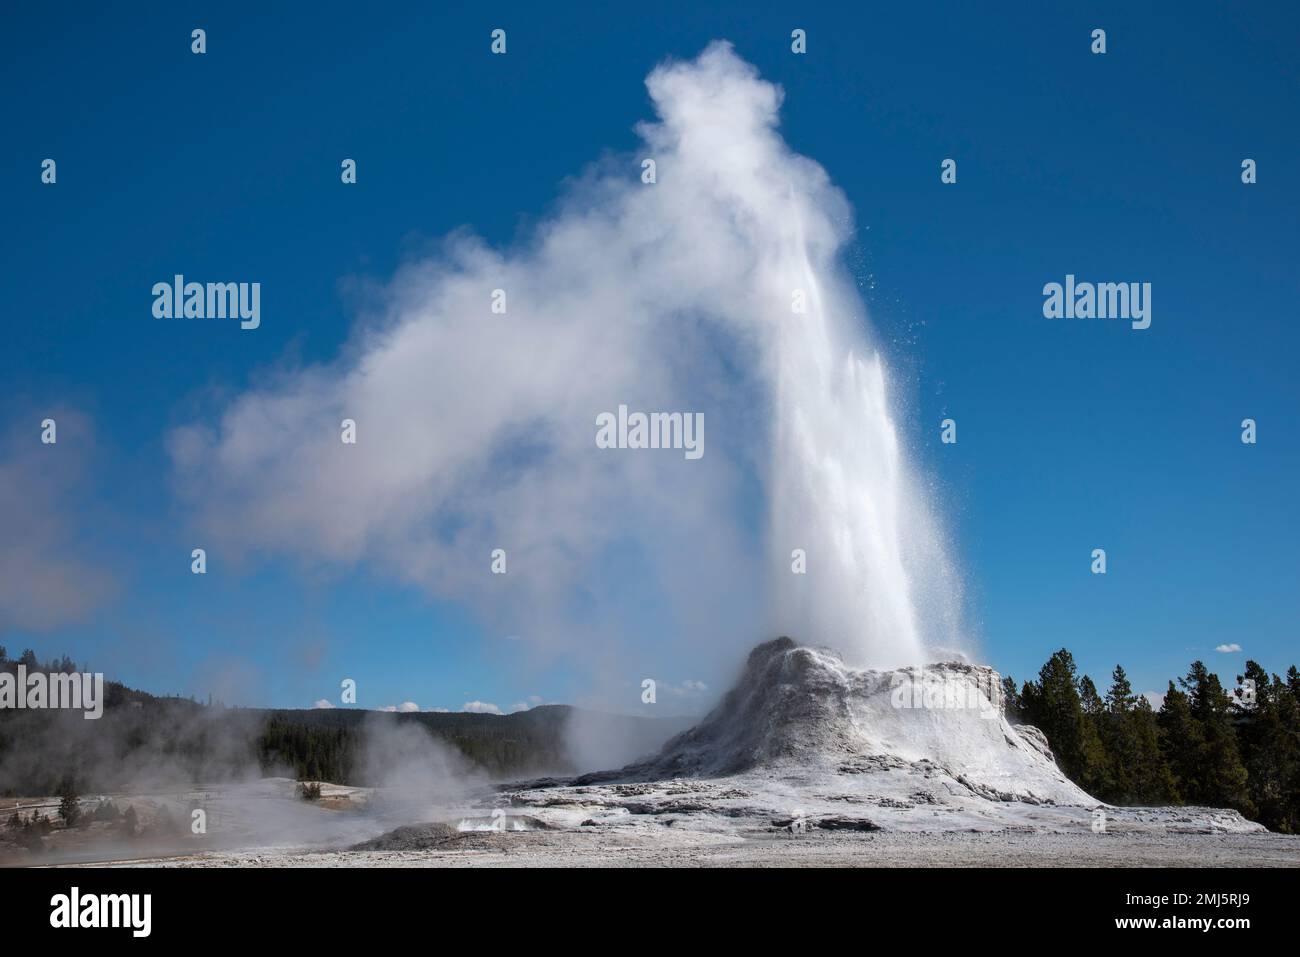 Castle Geyser erupting in Yellowstone National Park. Stock Photo